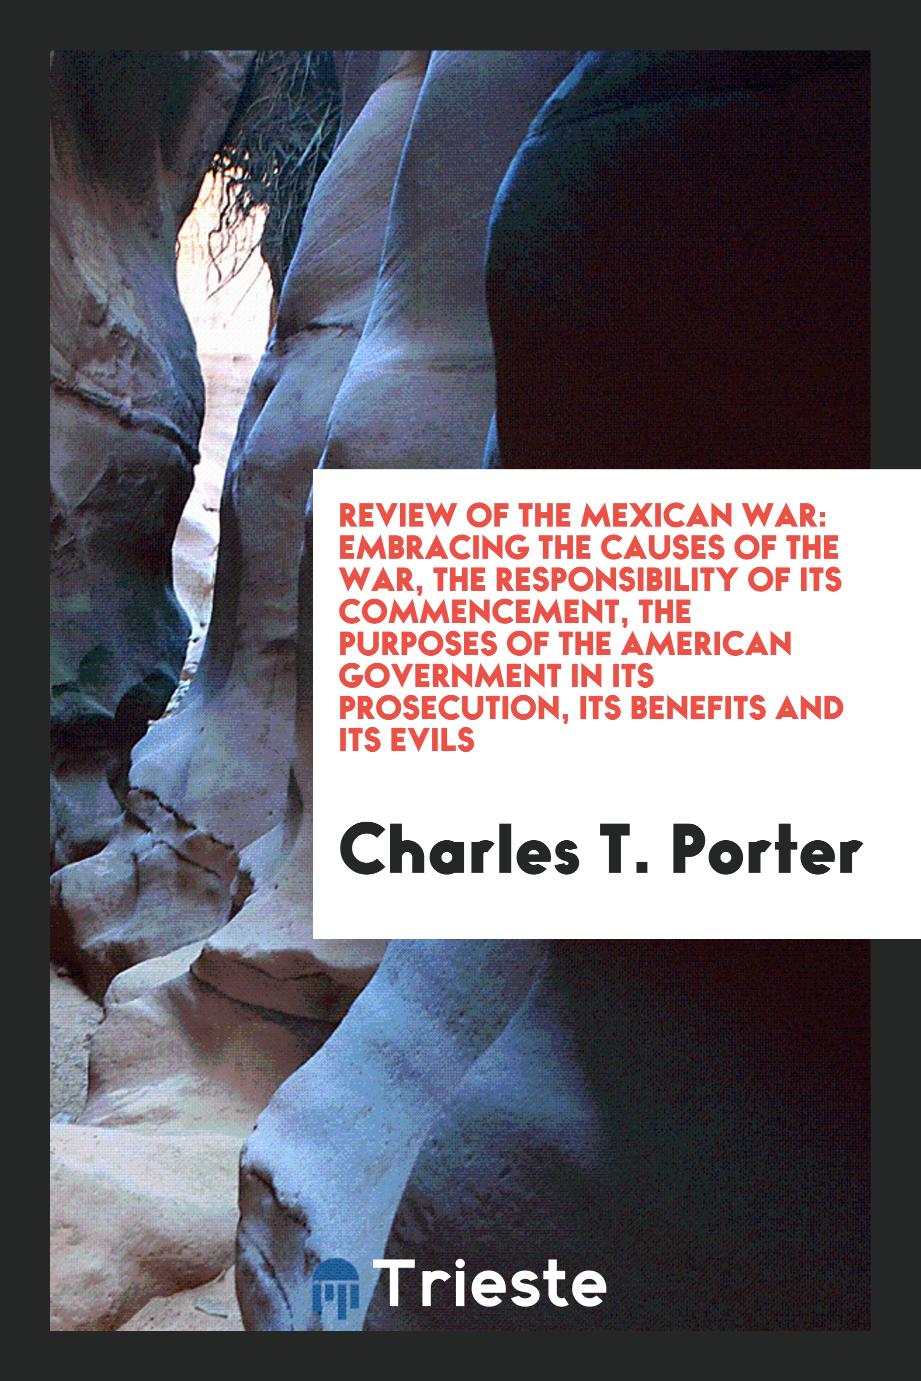 Review of the Mexican war: embracing the causes of the war, the responsibility of its commencement, the purposes of the American government in its prosecution, its benefits and its evils